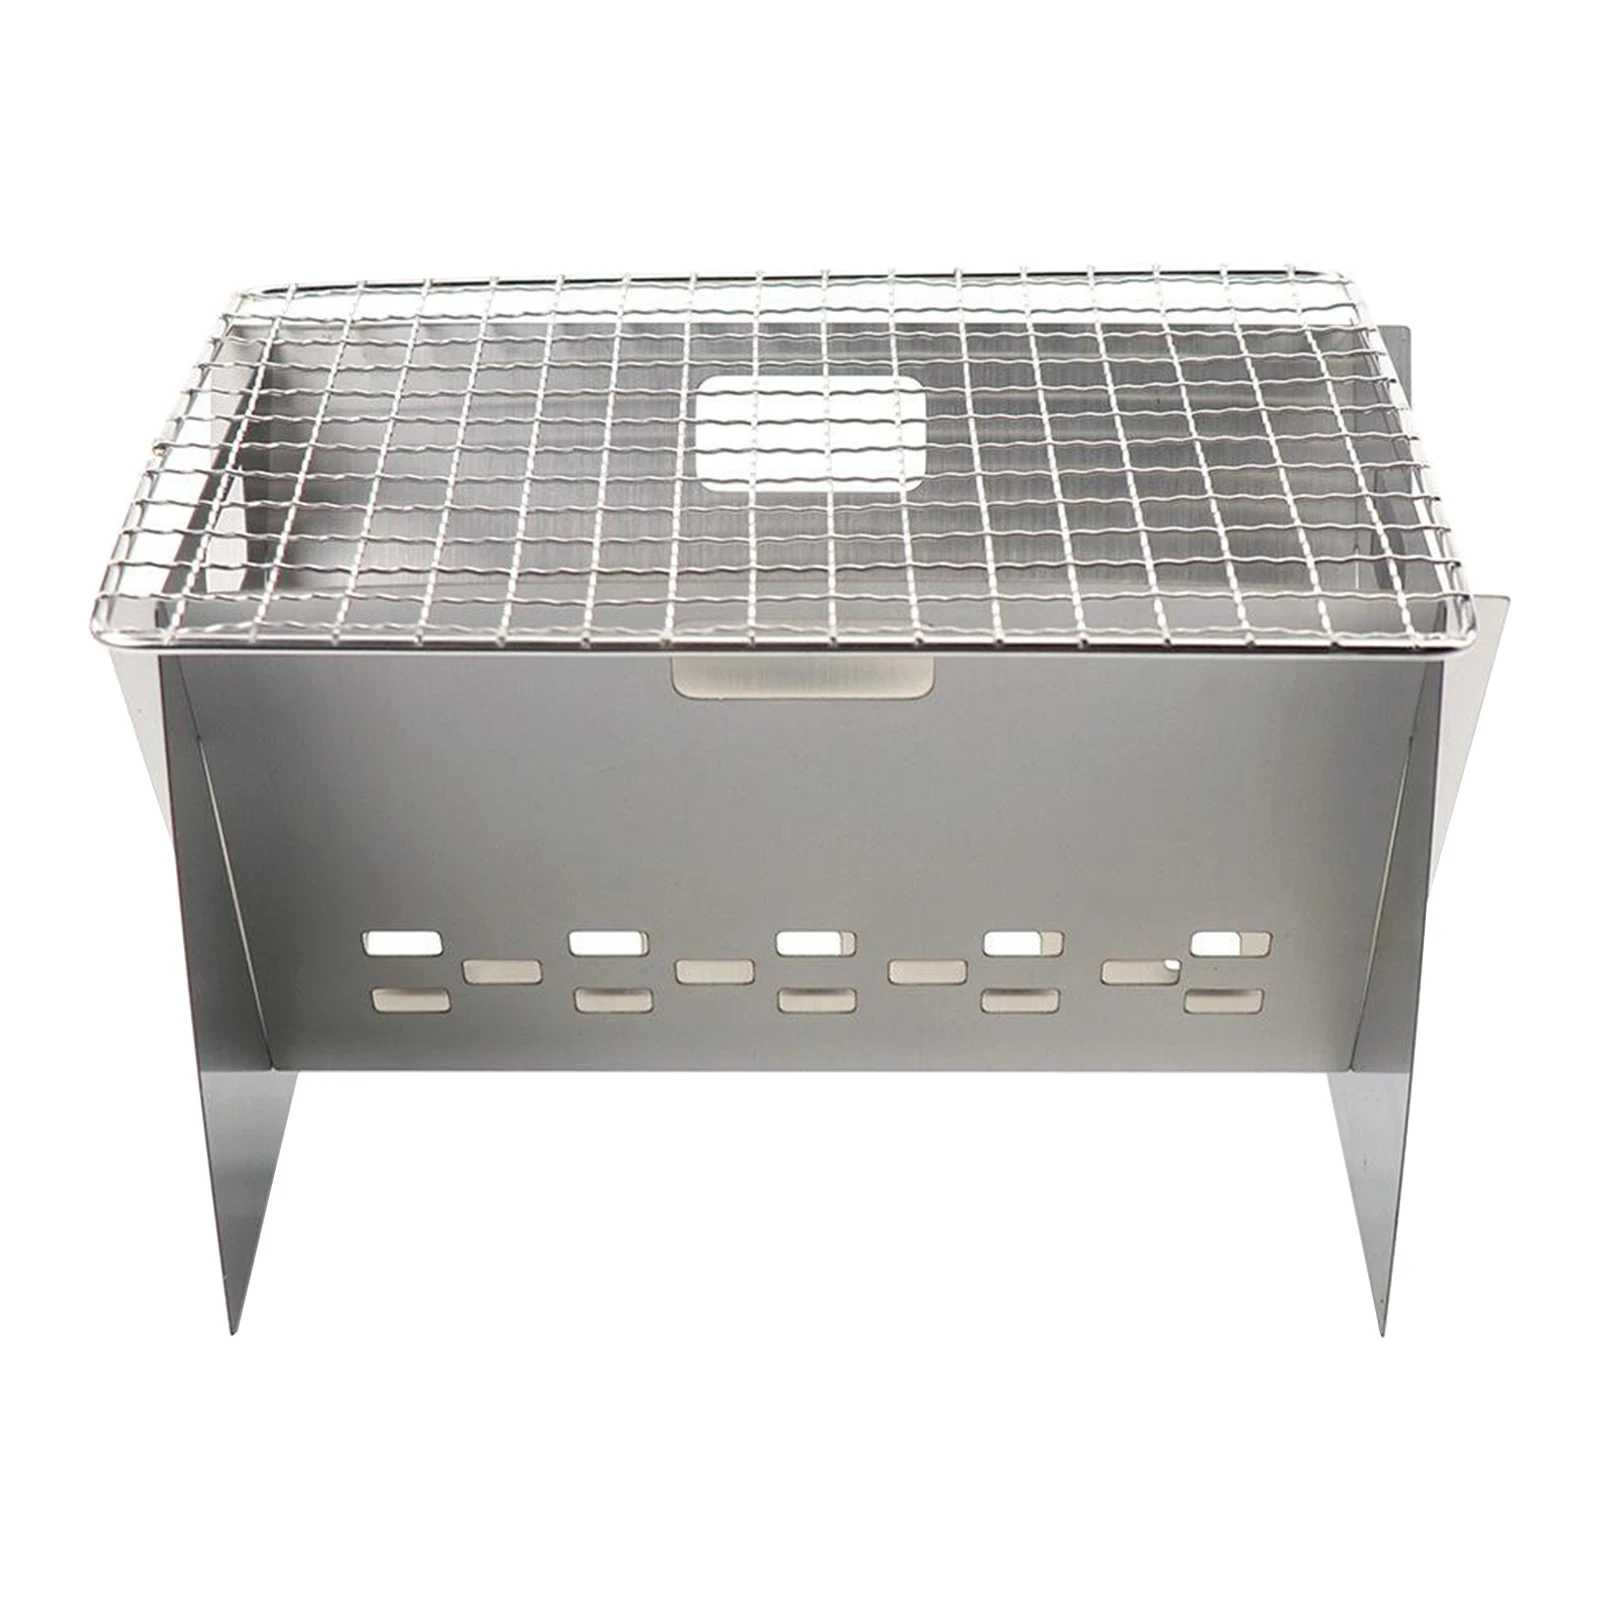 Compact Folding Fire Bowl Stainless Steel Portable Camping Grill for BBQ, Camping, Picnics, Backyards